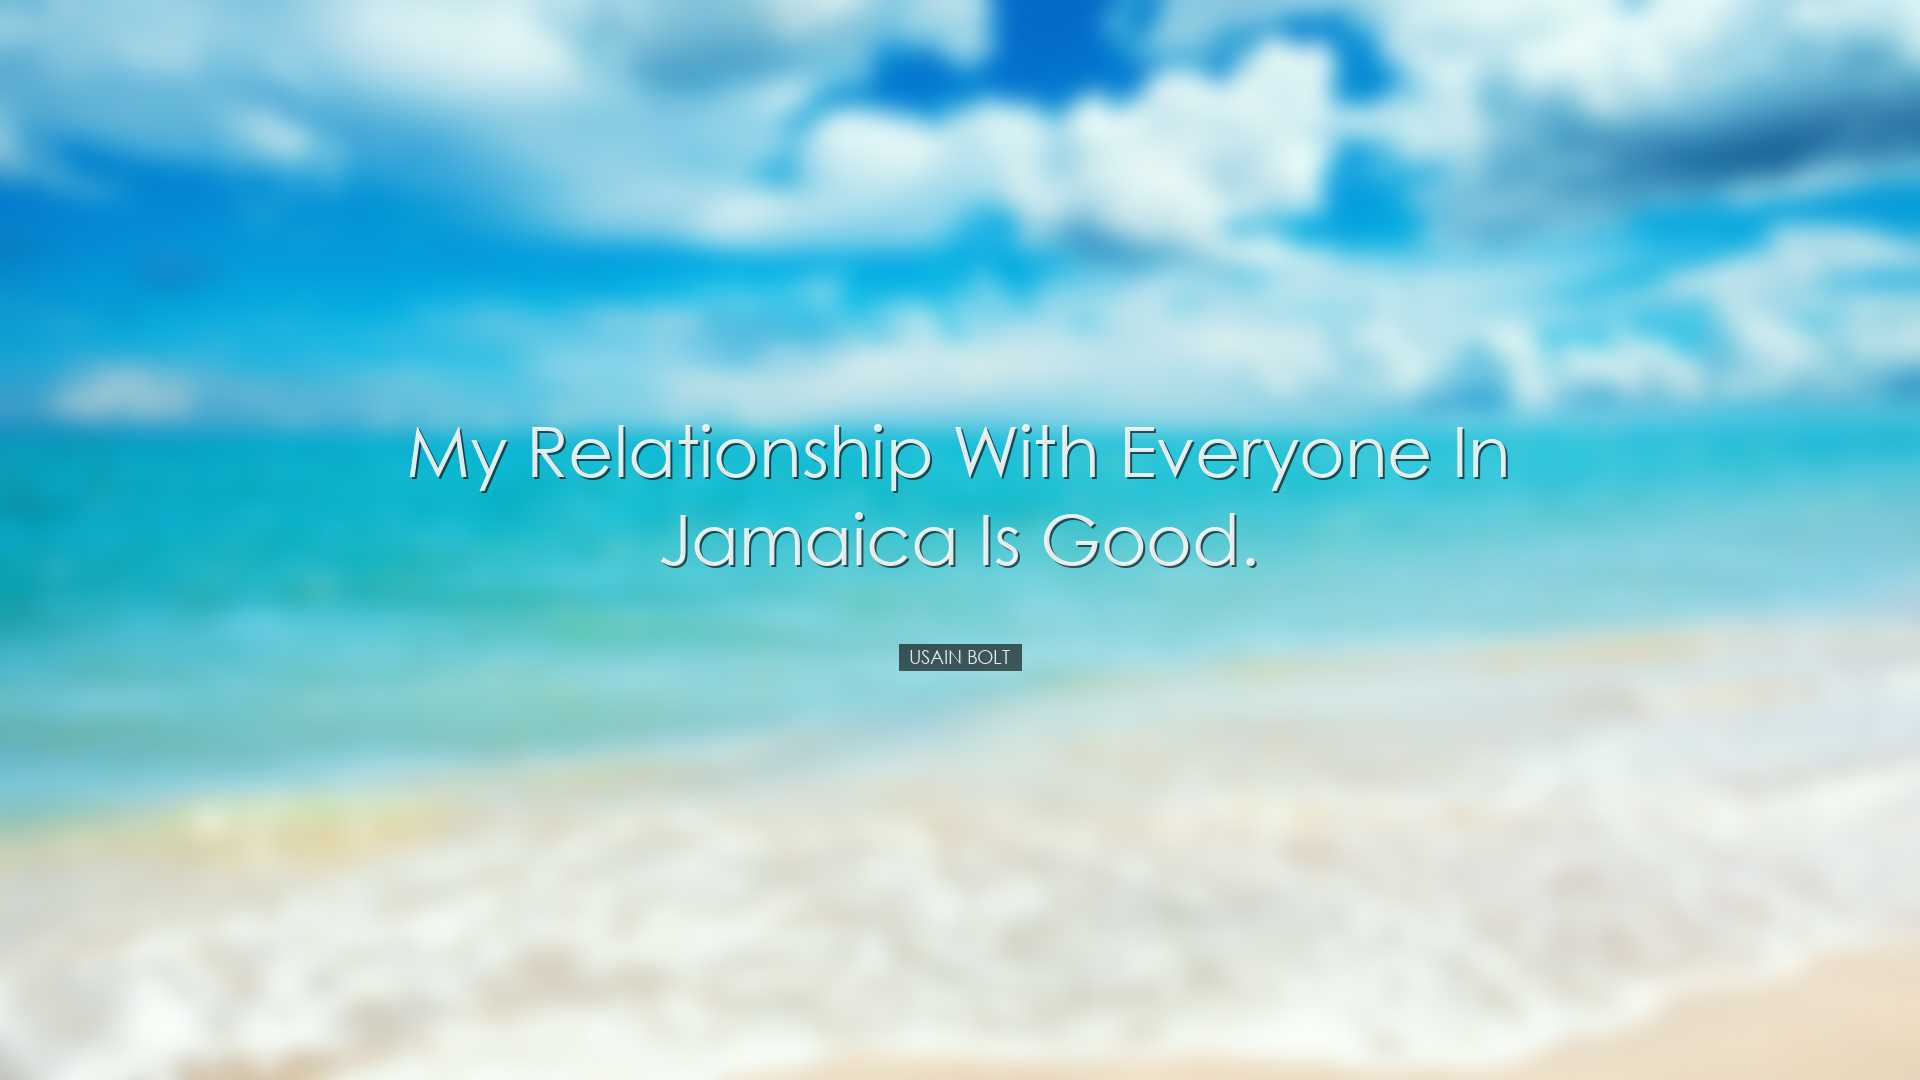 My relationship with everyone in Jamaica is good. - Usain Bolt